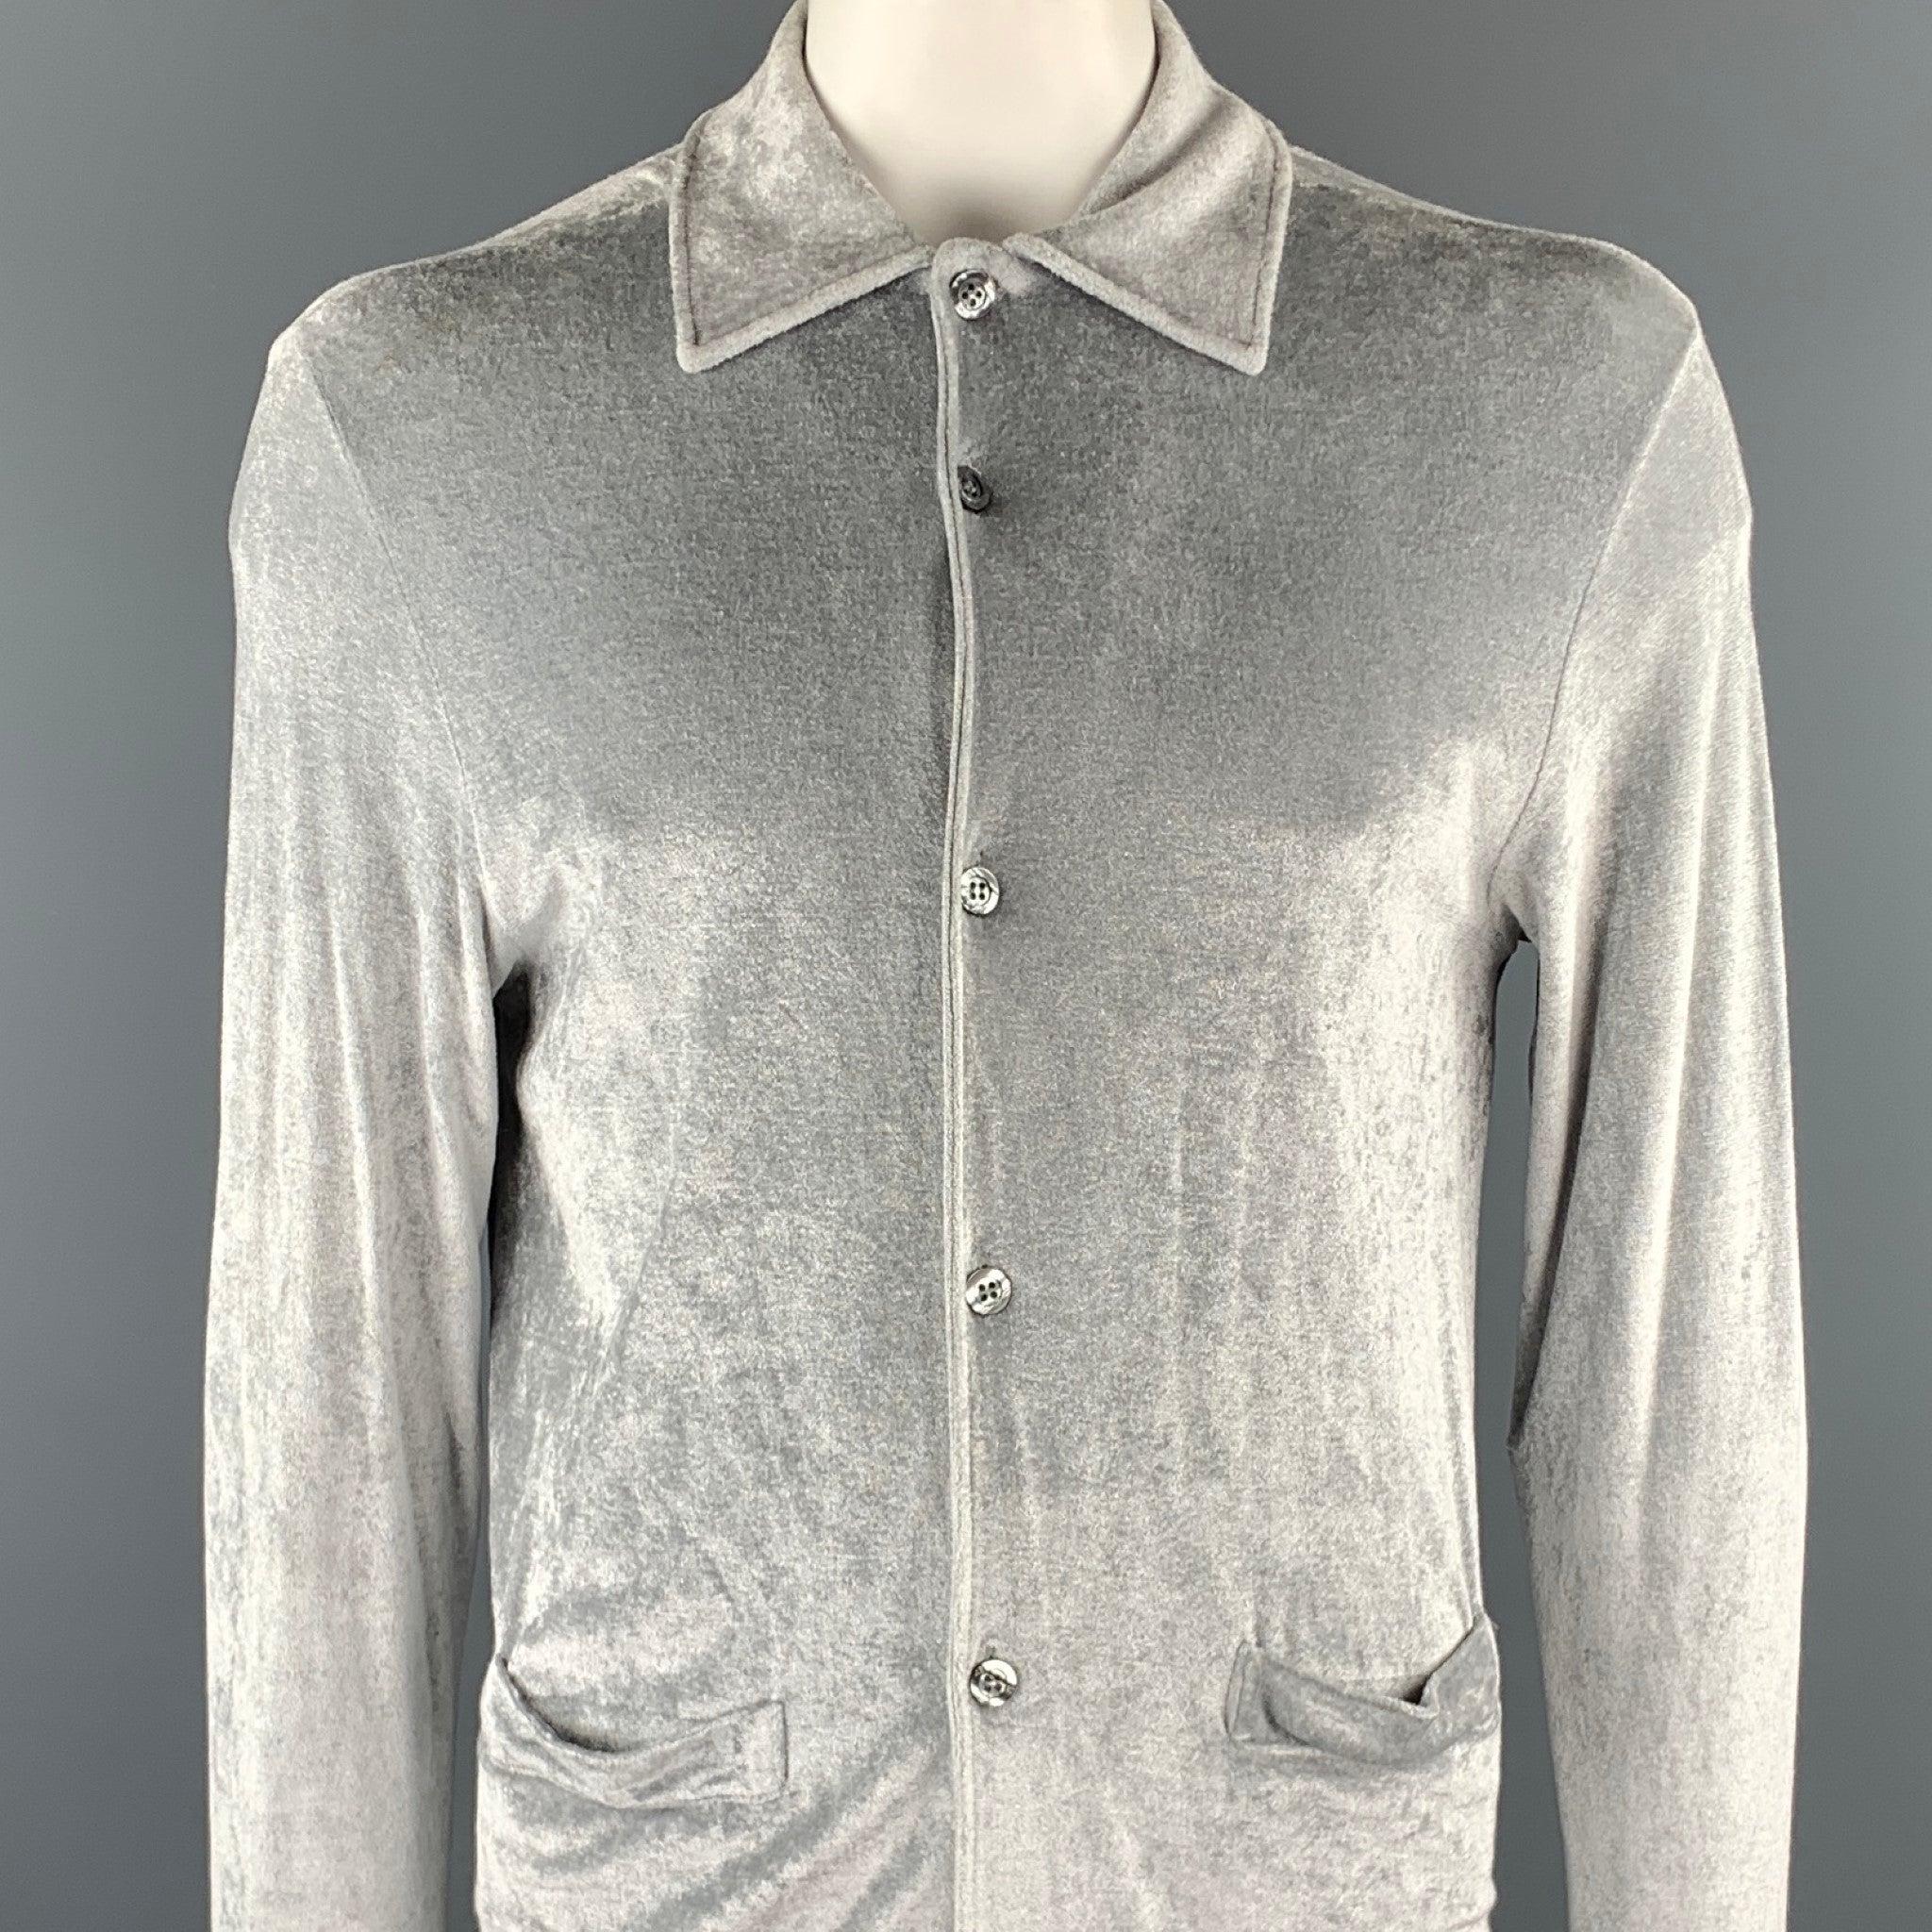 DANIELE ALESSANDRINI jacket comes in a silver shimmery viscose / nylon featuring slit pockets and a button up style. Made in Italy.Very Good
Pre-Owned Condition. 

Marked:   L 

Measurements: 
 
Shoulder: 19 inches 
Chest: 38 inches 
Sleeve: 28.5